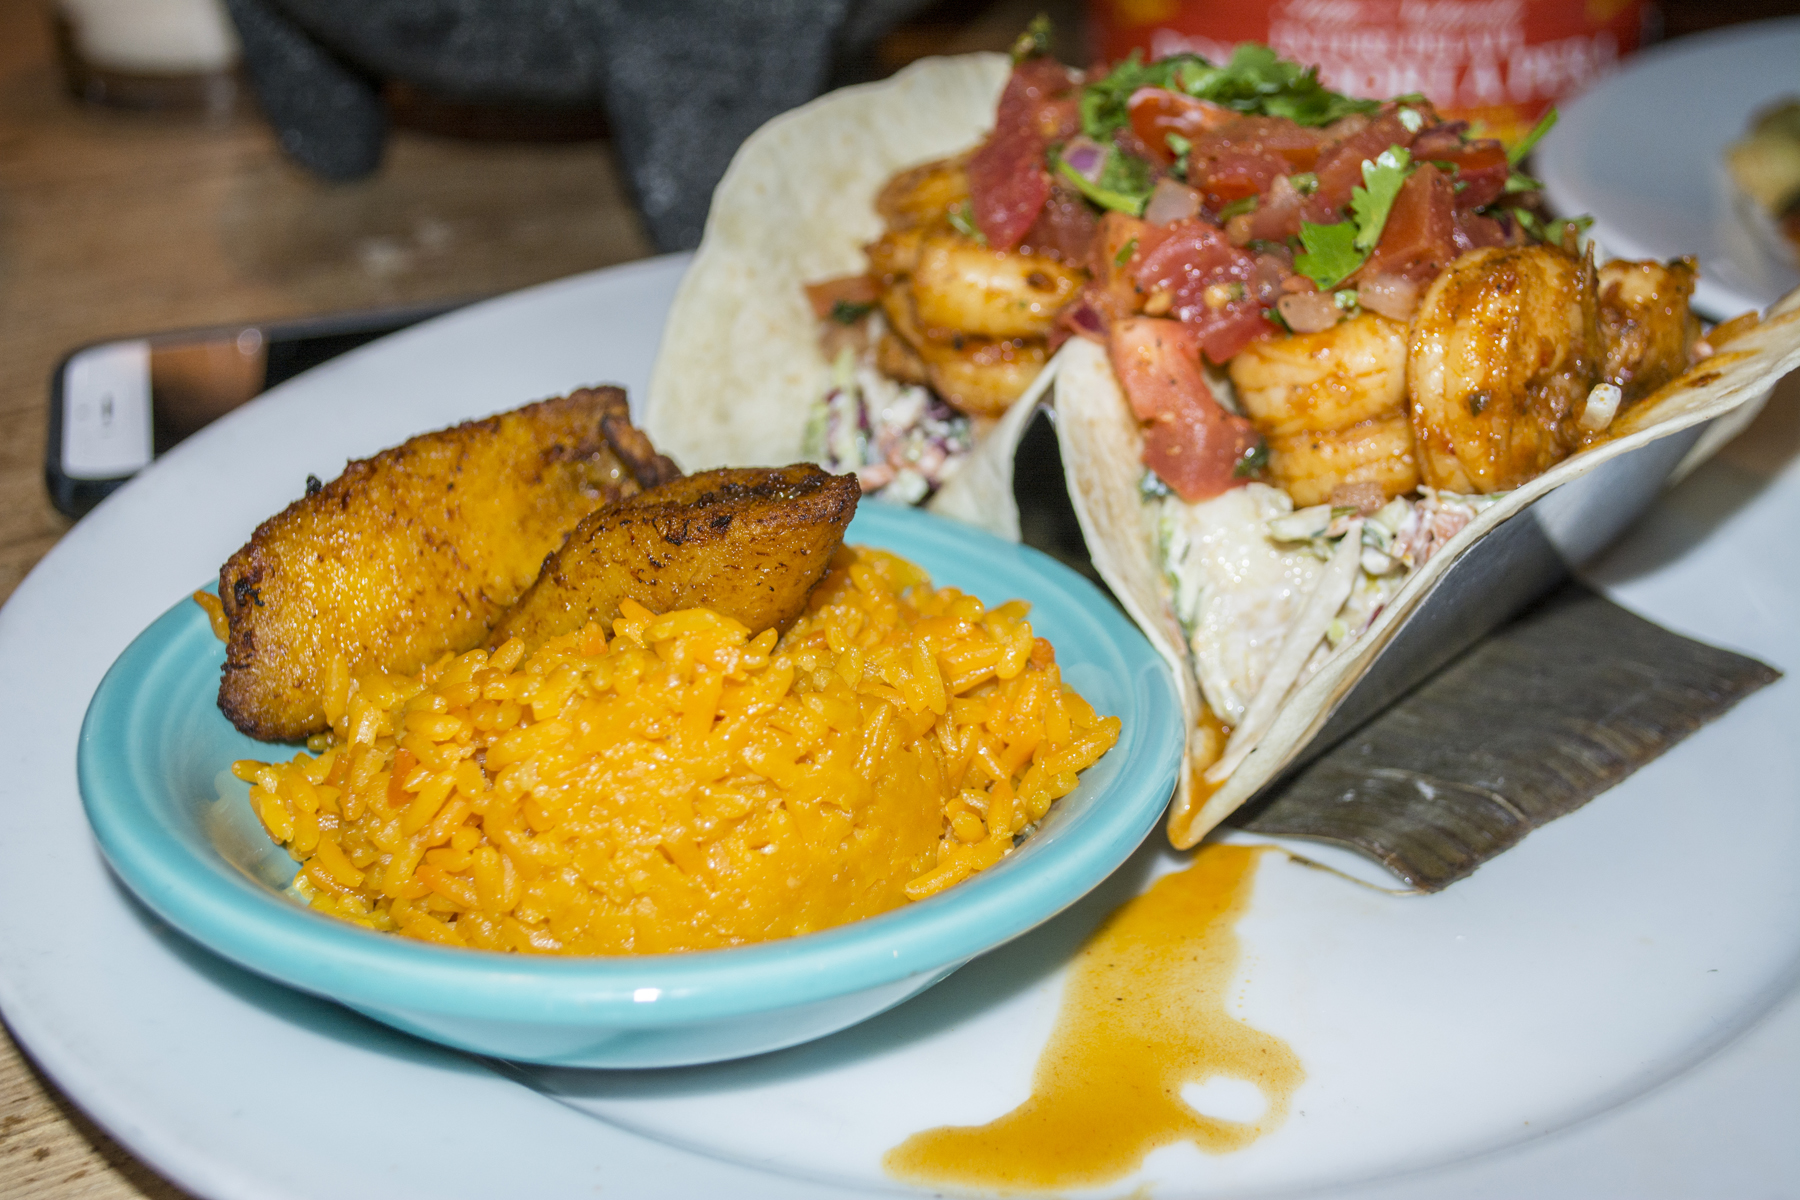   The Angry Shrimp Tacos ($13.95) feature spicy shrimp served with vegetable citrus slaw, lime, margarita crema, Spanish rice and plantains.   Long Islander News photos/Barbara Fiore           